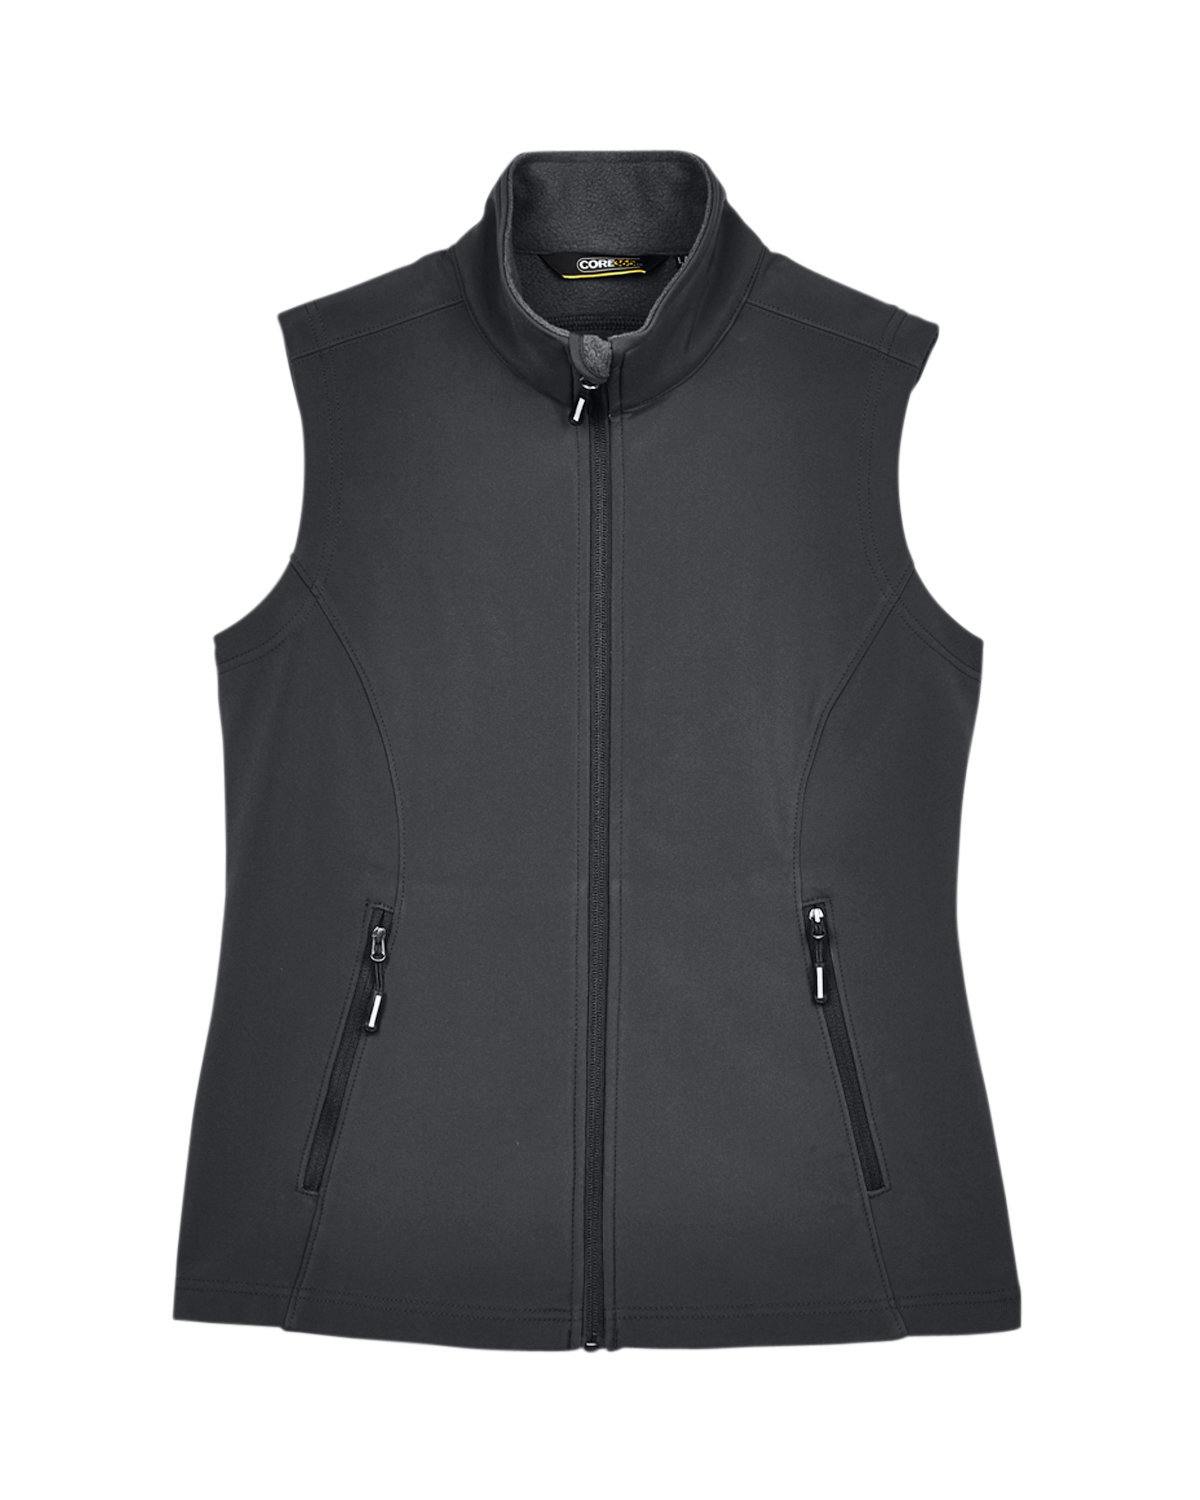 Image for Ladies' Cruise Two-Layer Fleece Bonded Soft Shell Vest